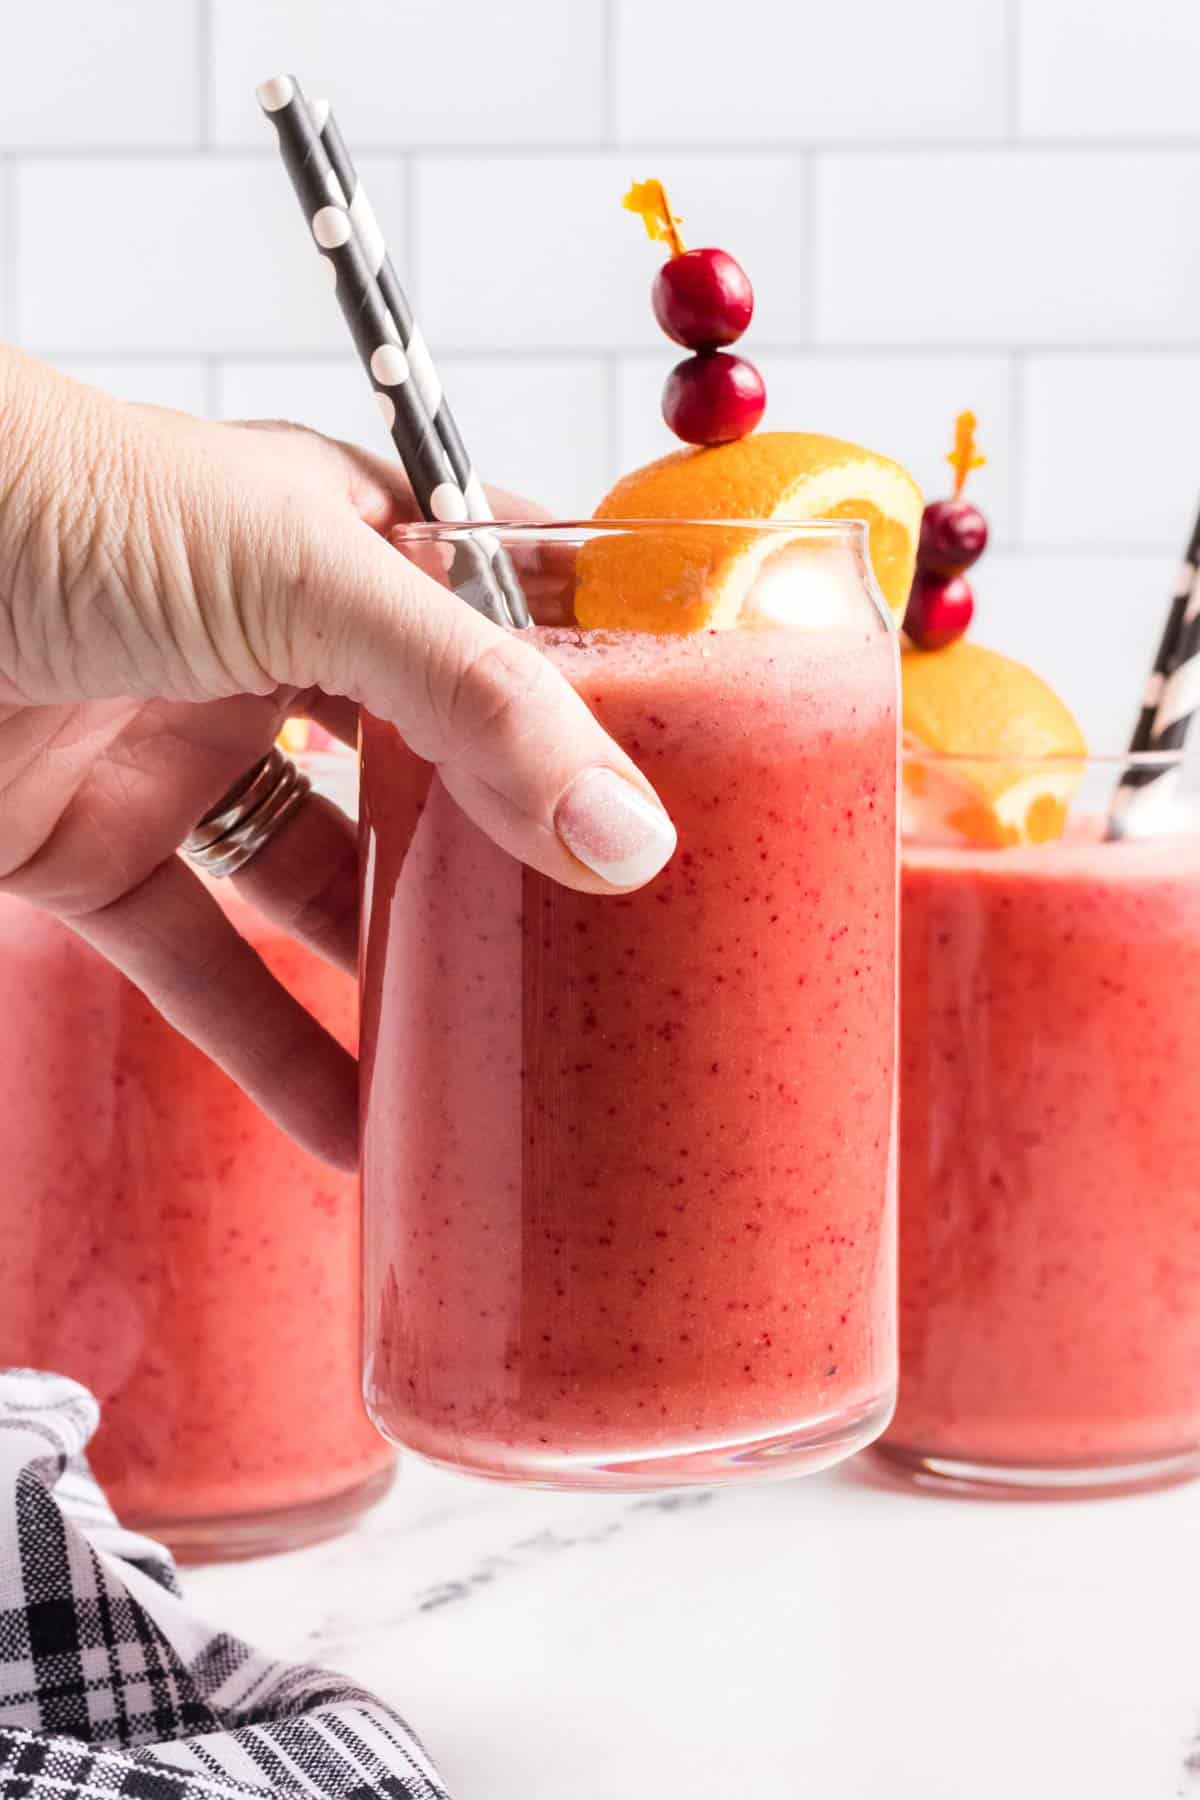 a hand lifting up a glass of smoothie.